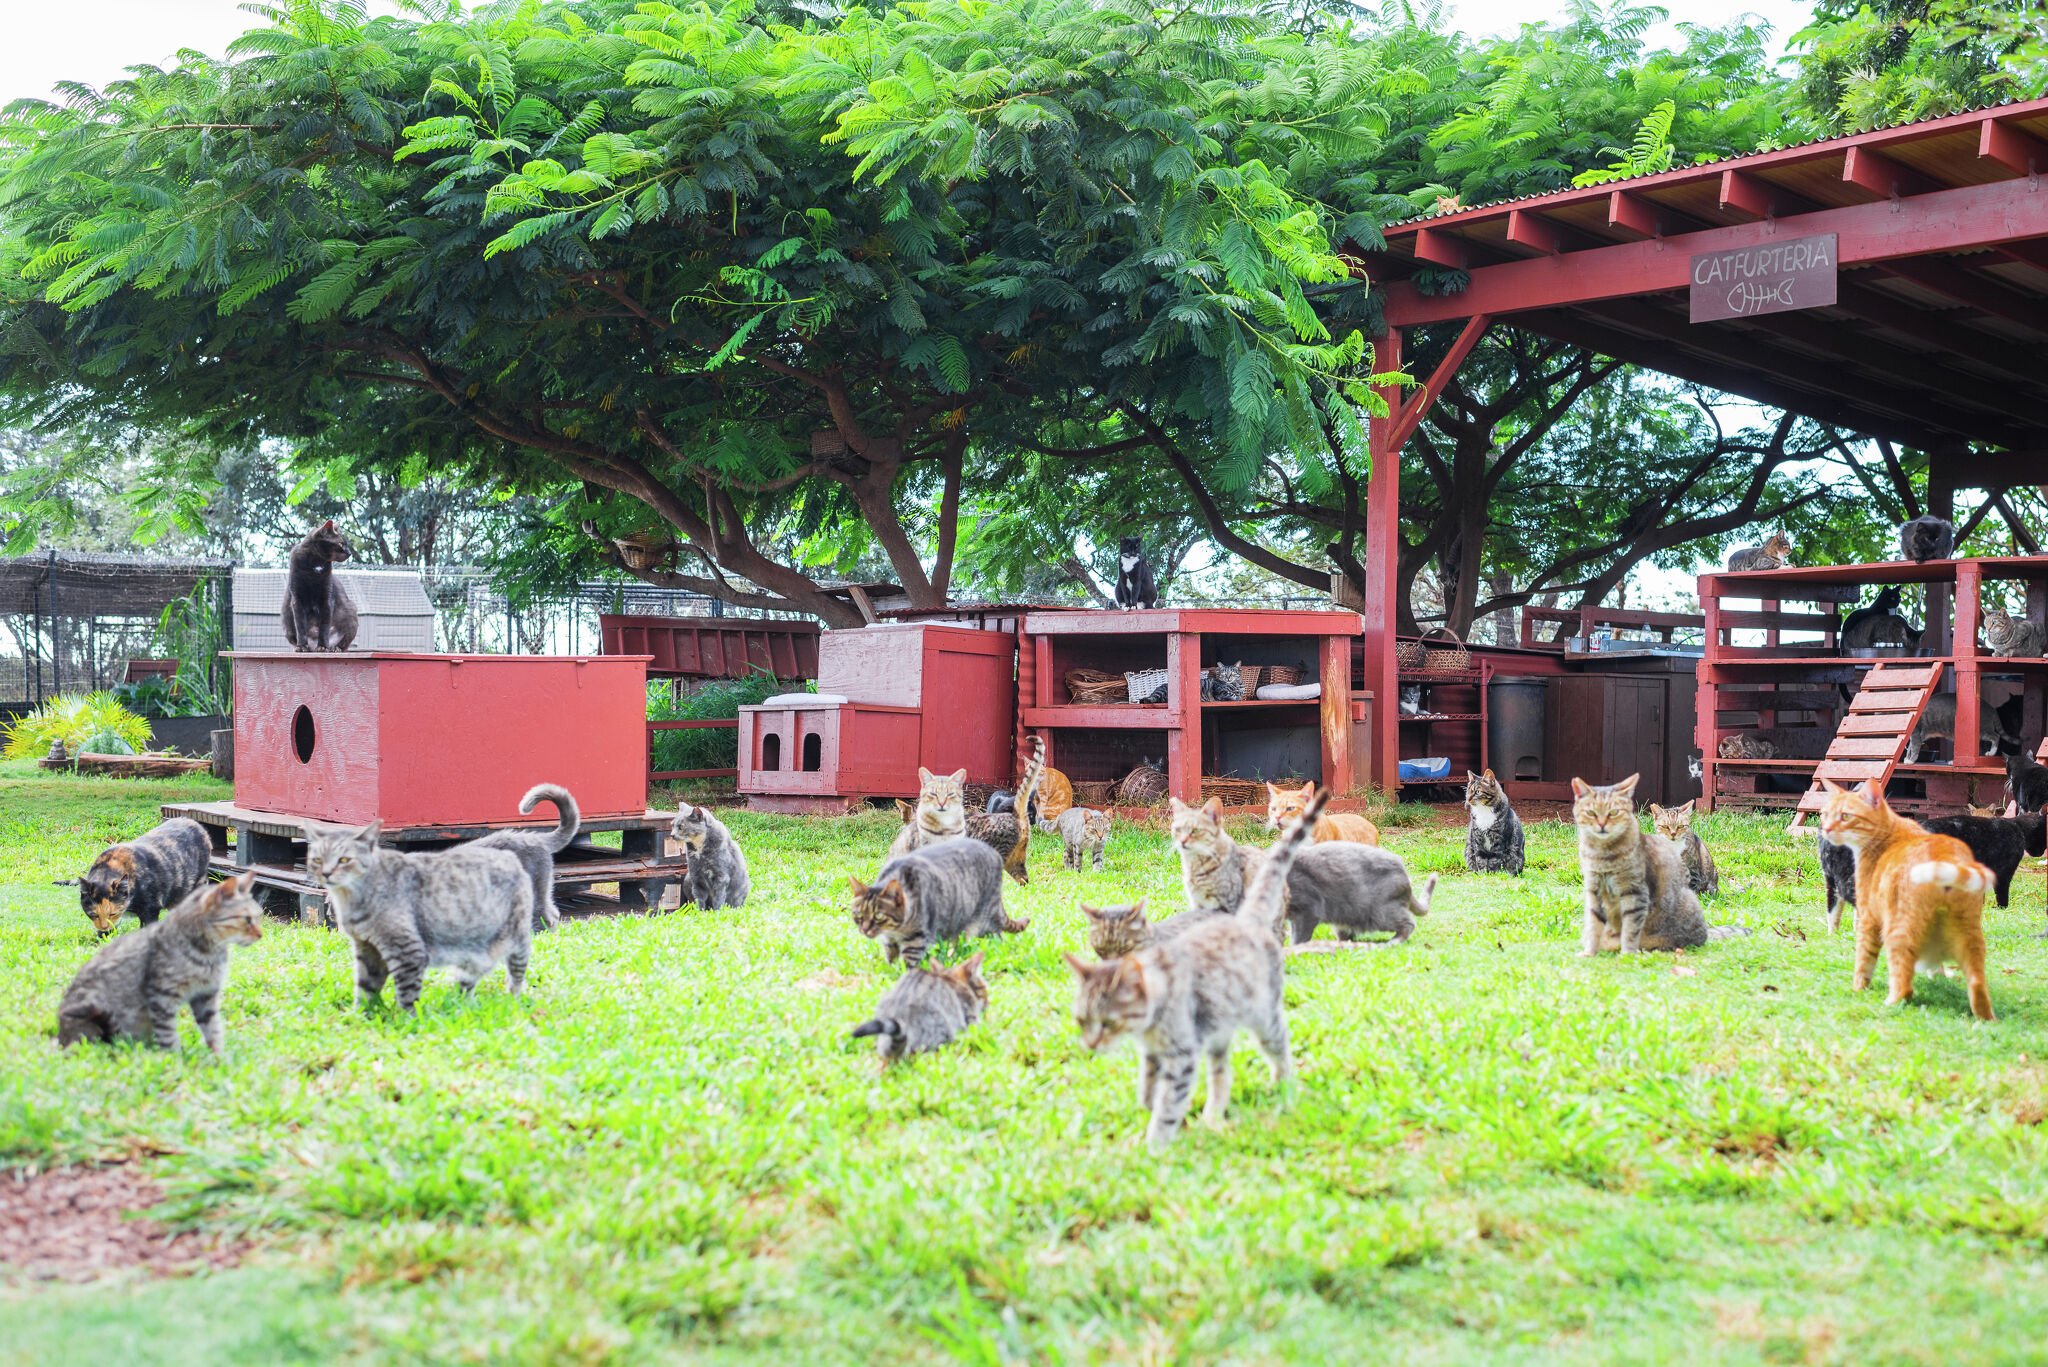 One Hawaii woman’s quest to save the feral cats of Lanai at the Lanai Cat Sanctuary.